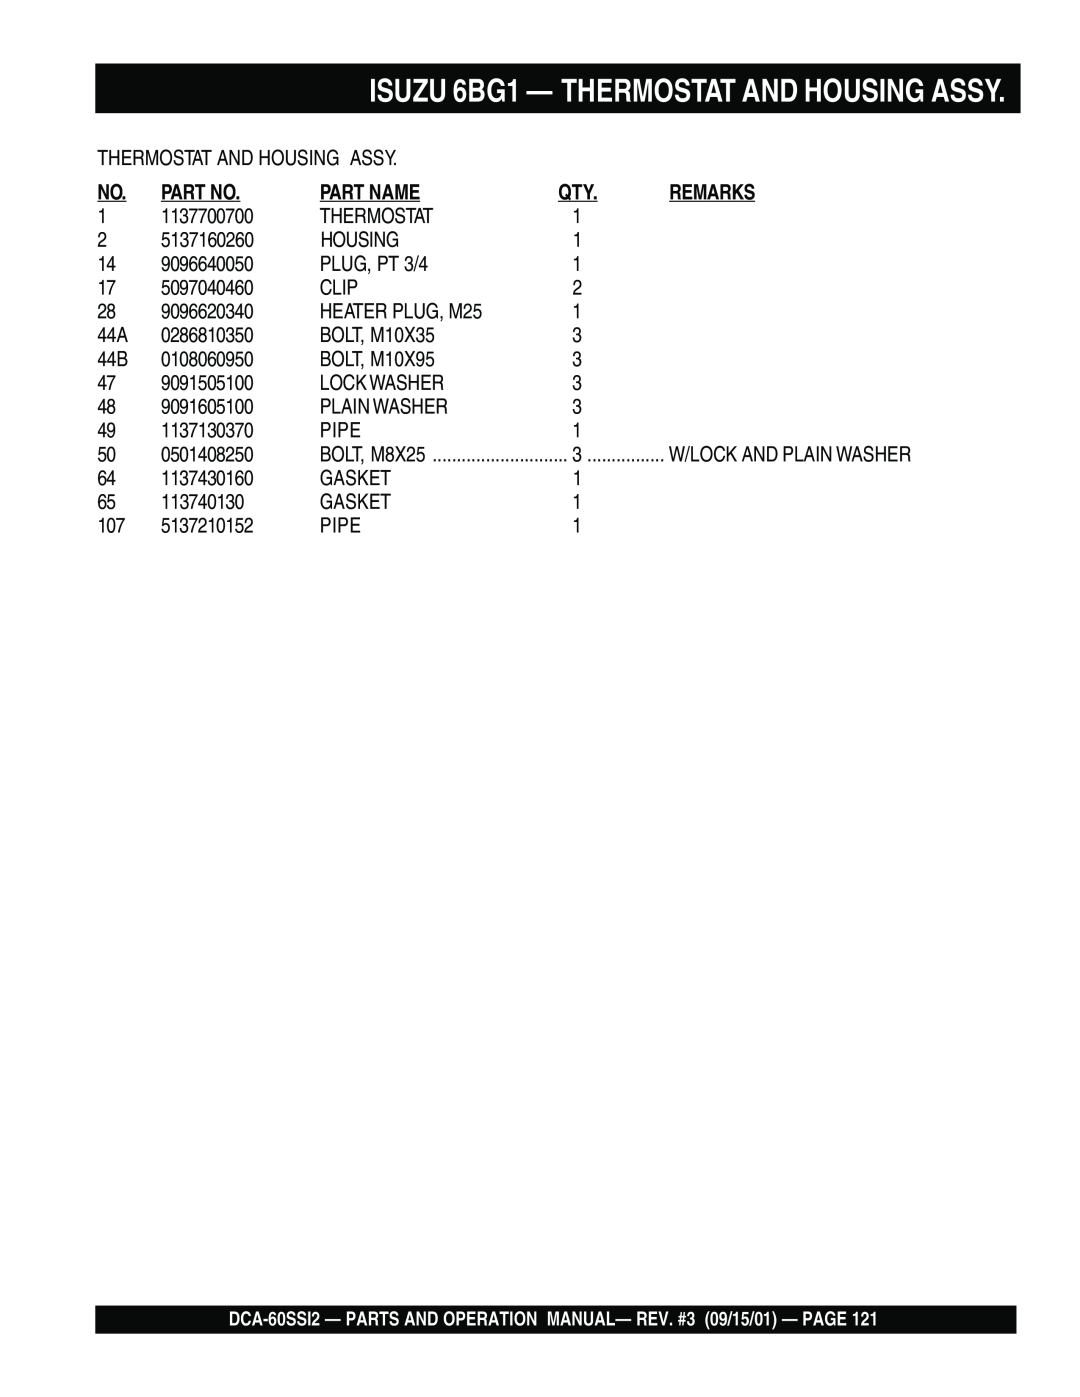 Multiquip DCA-60SS12 operation manual ISUZU 6BG1 — THERMOSTAT AND HOUSING ASSY, Part No, Part Name, Remarks 